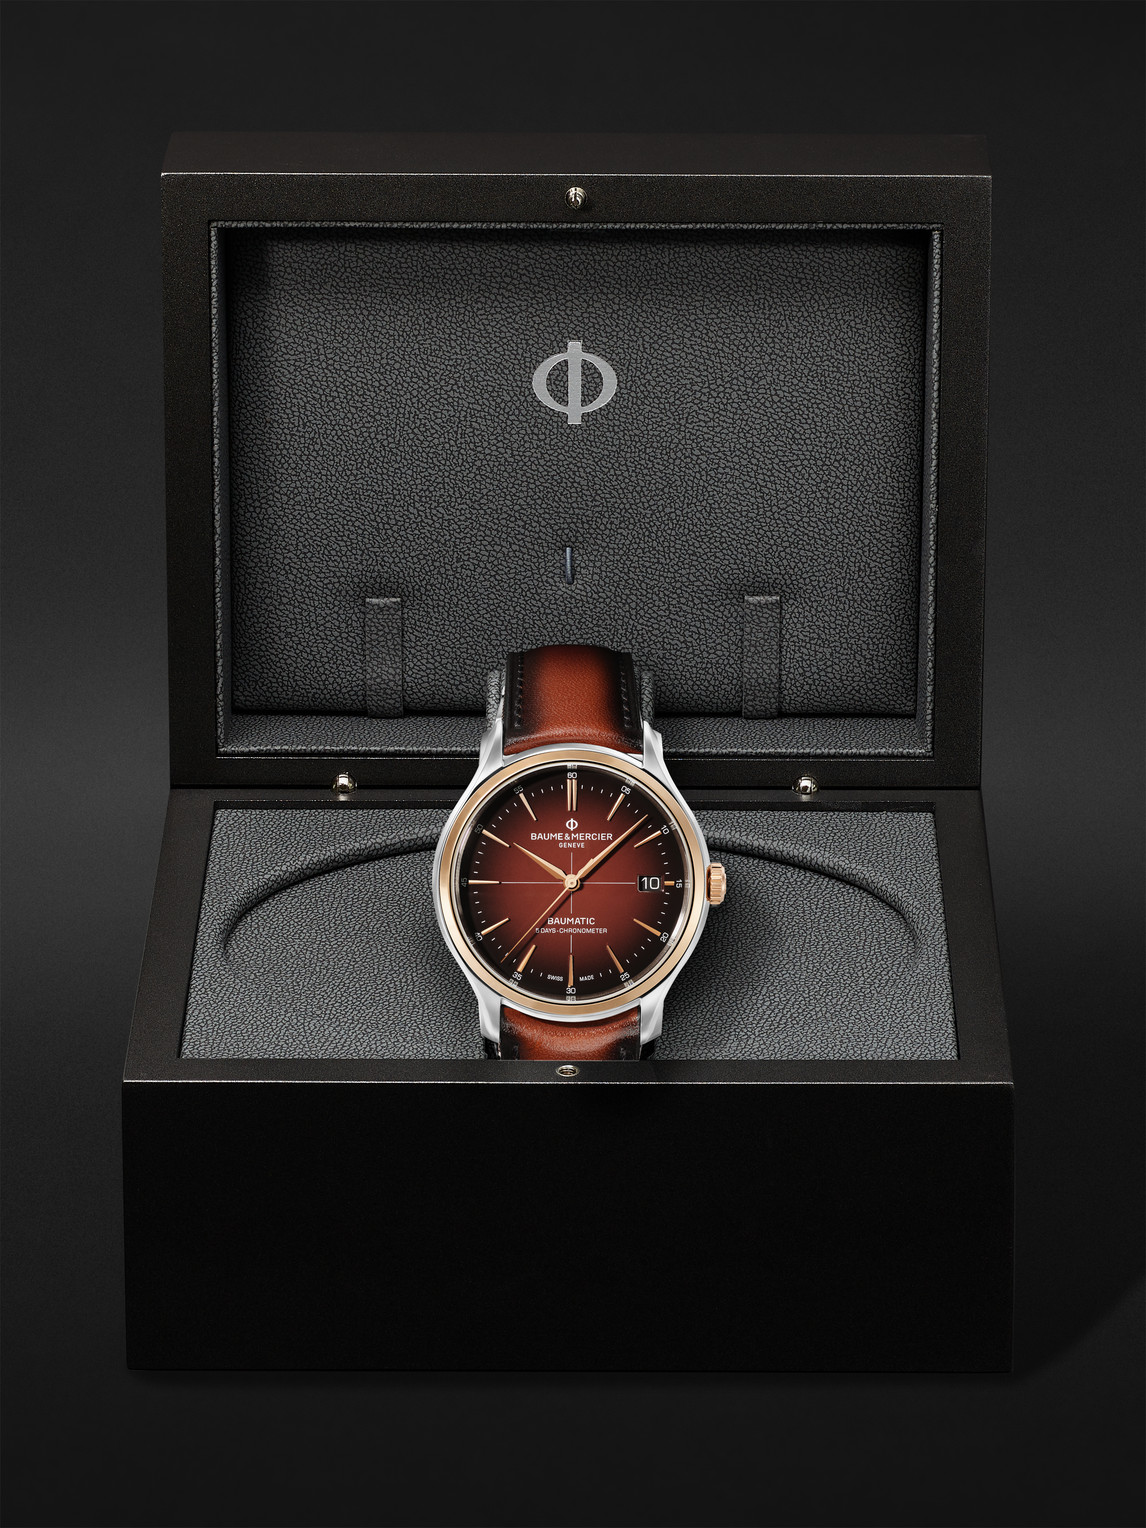 Shop Baume & Mercier Clifton Baumatic Automatic 40mm Stainless Steel And Leather Watch, Ref. No. M0a10713 In Brown